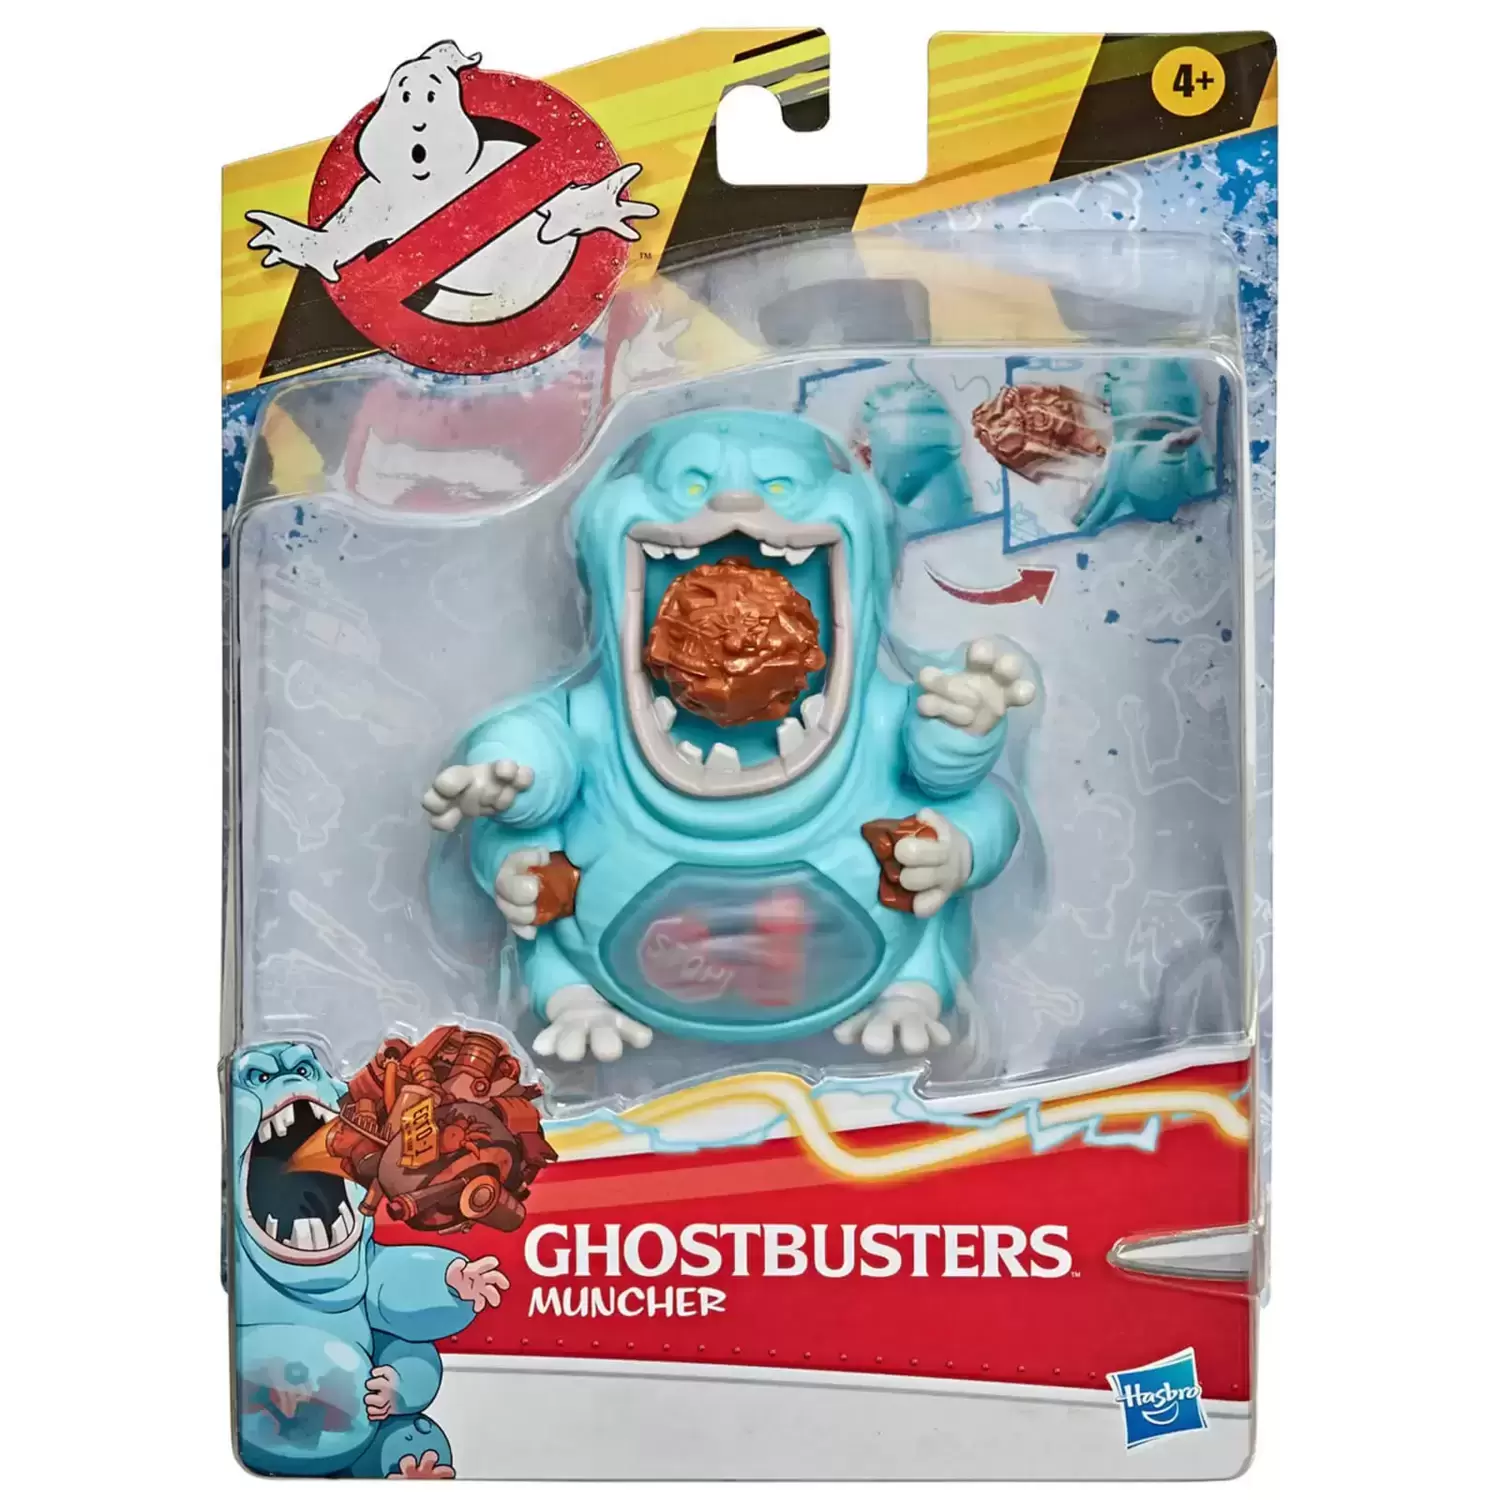 Ghostbusters Plasma Series - Muncher - Fright Feature